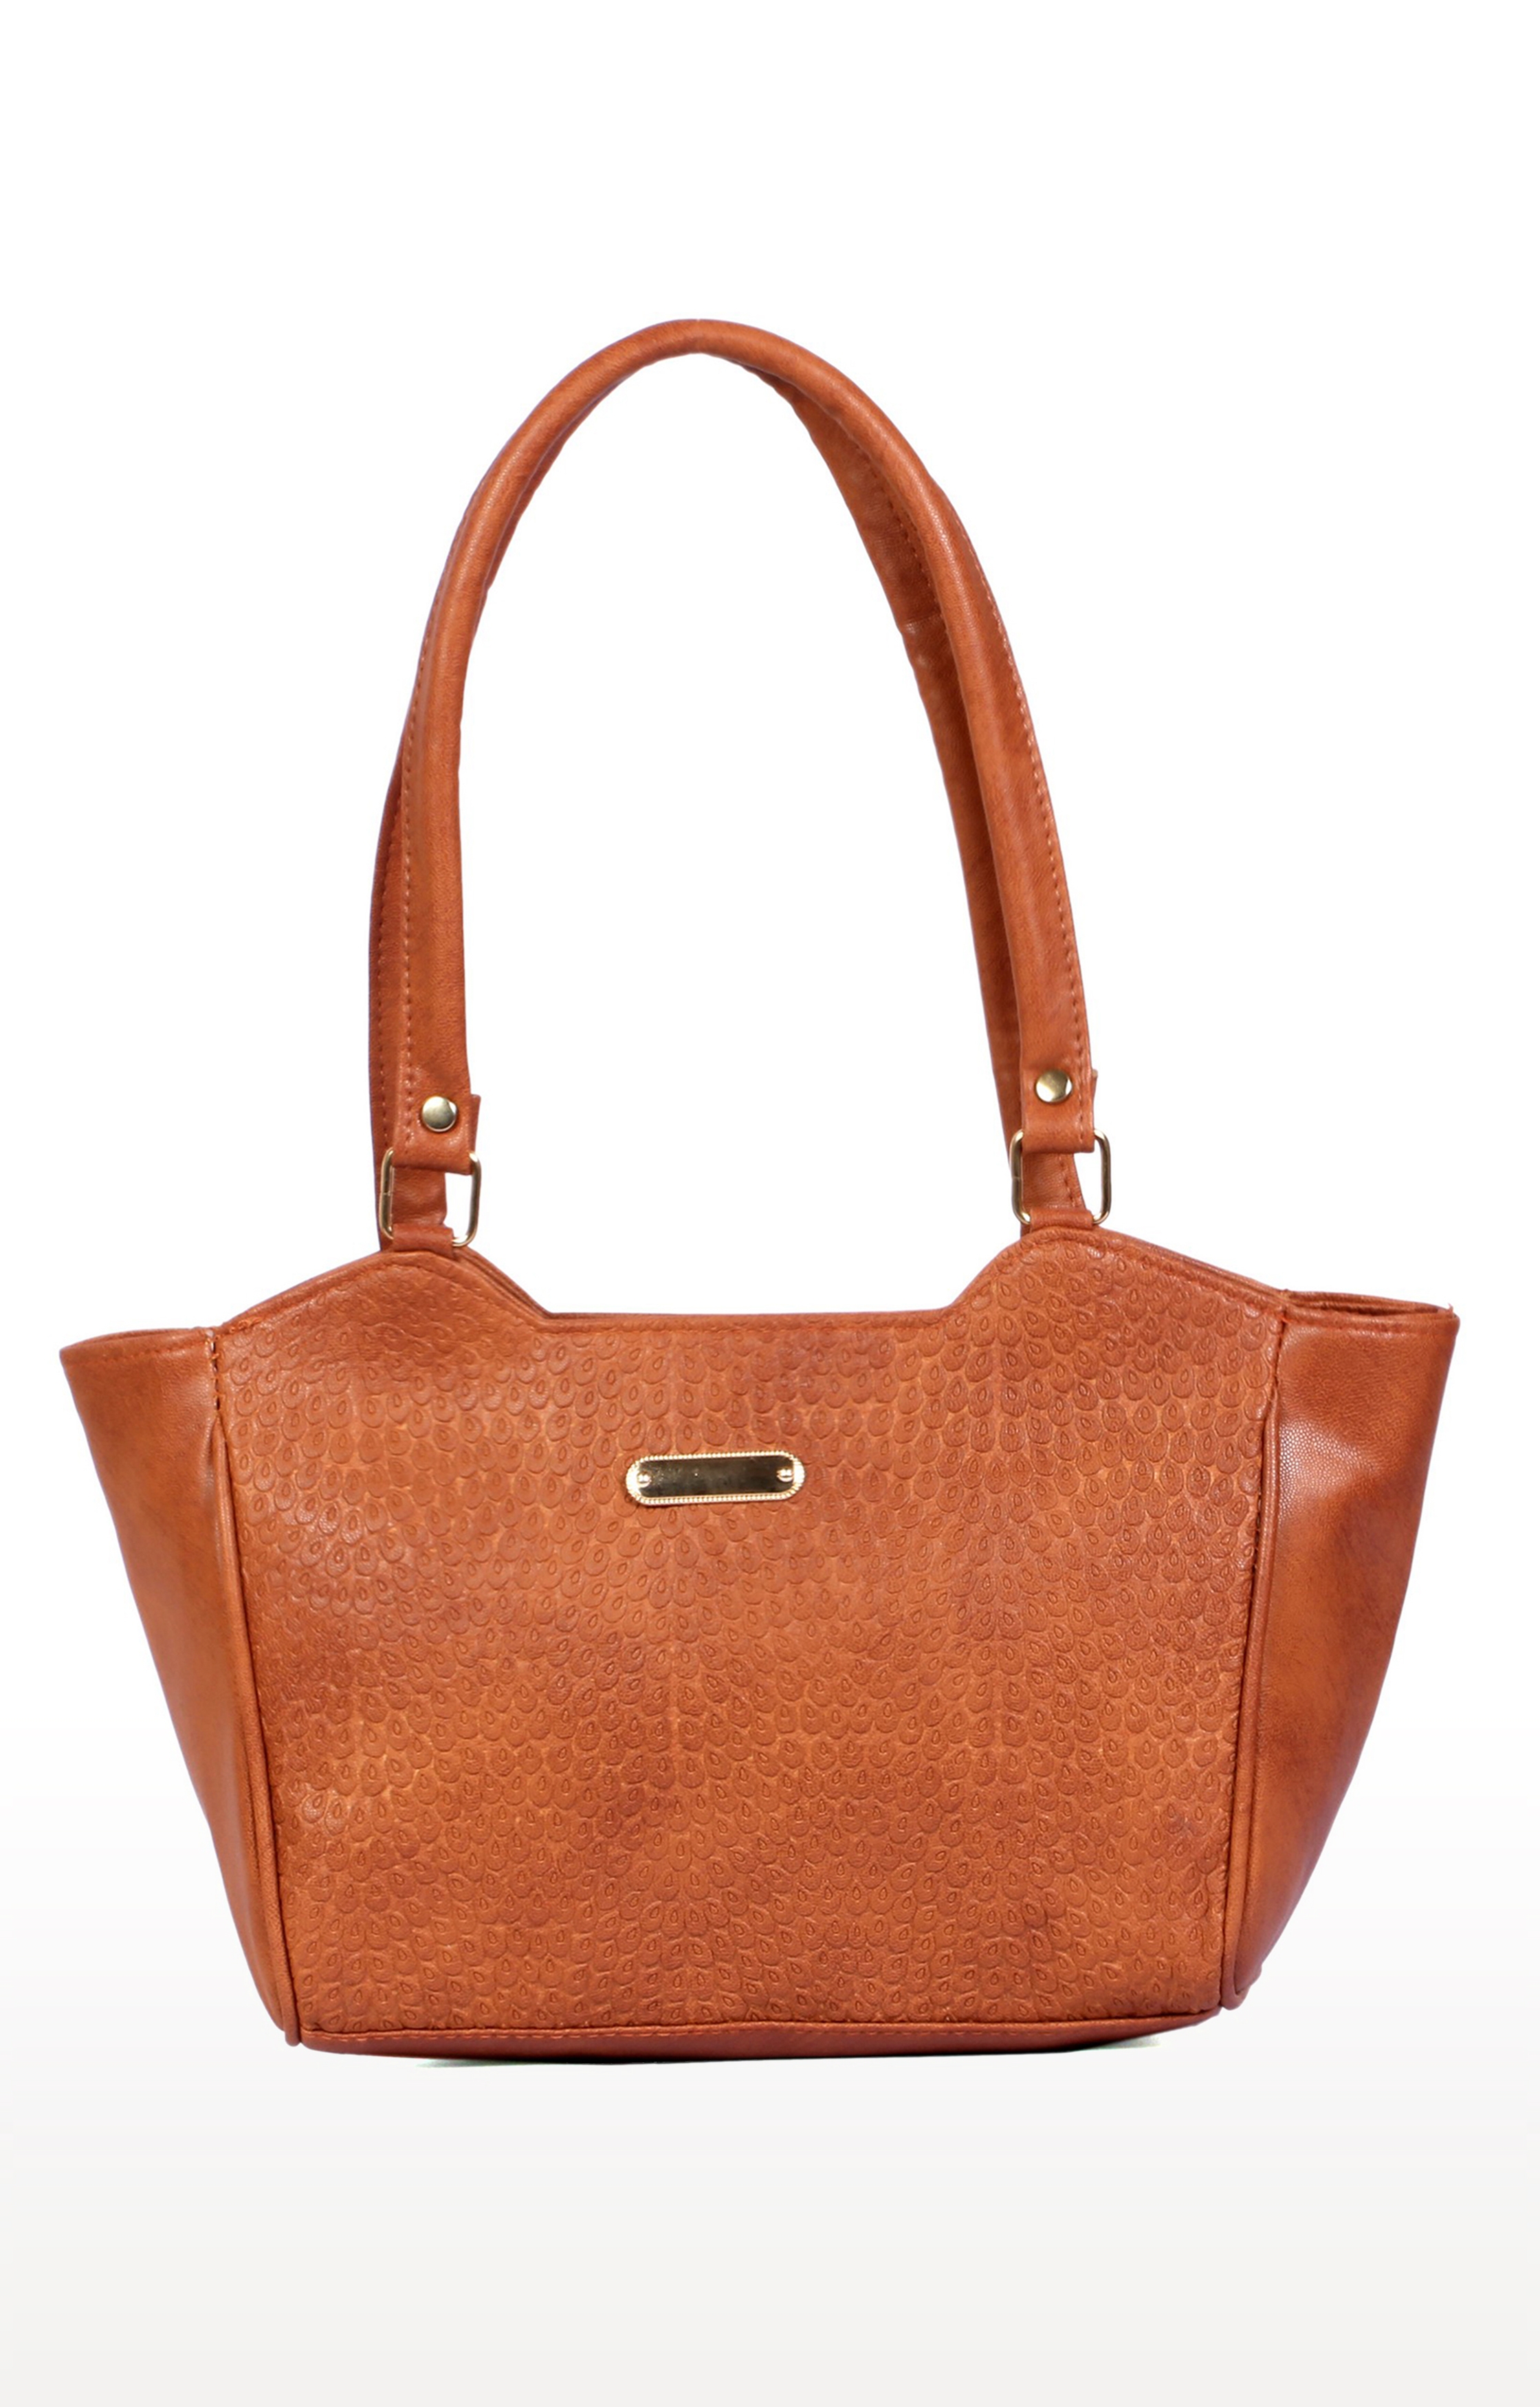 EMM | Lely's Beautiful Women's Handbag With Latest Shades -Brown 0